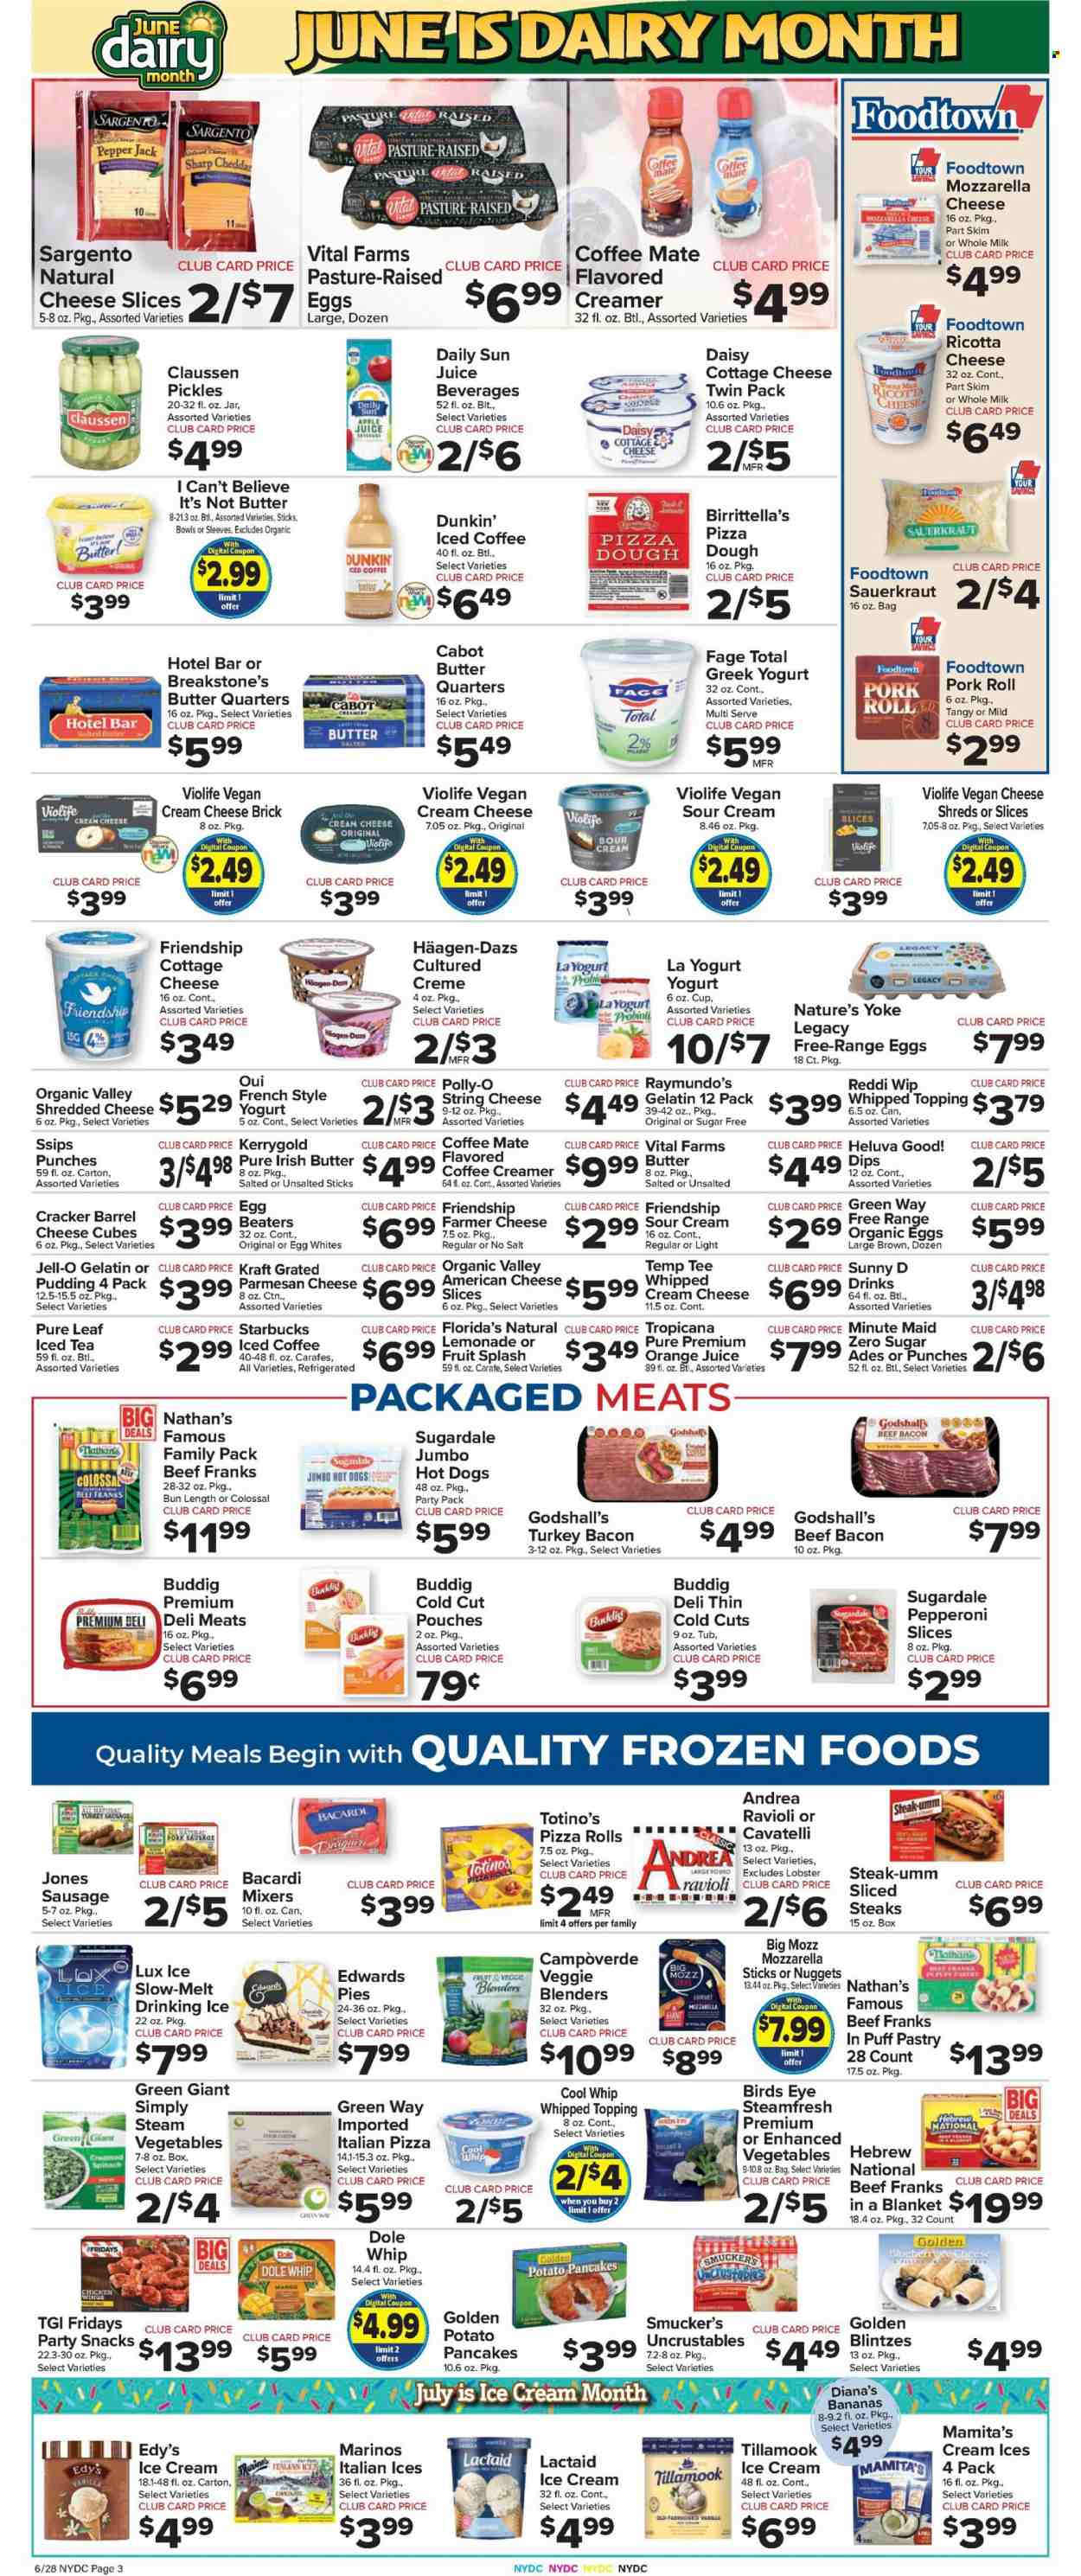 thumbnail - Foodtown Flyer - 06/28/2024 - 07/04/2024 - Sales products - pie, pizza rolls, dessert, Dole, lobster, ravioli, hot dog, pizza, nuggets, pancakes, Bird's Eye, potato pancakes, Kraft®, Sugardale, ready meal, turkey bacon, pork sausage, frankfurters, turkey sausage, american cheese, cottage cheese, farmer cheese, Lactaid, ricotta, shredded cheese, sliced cheese, string cheese, cheddar, parmesan, Pepper Jack cheese, Sargento, vegan cheese, greek yoghurt, pudding, Coffee-Mate, milk, margarine, irish butter, salted butter, I Can't Believe It's Not Butter, Cool Whip, sour cream, creamer, coffee and tea creamer, dip, pizza dough, ice cream, Häagen-Dazs, frozen vegetables, chicken wings, Florida's Natural, topping, Jell-O, sauerkraut, pickles, pickled cabbage, pickled vegetables, apple juice, lemonade, orange juice, fruit drink, ice tea, Sunny D, iced coffee, coffee drink, Pure Leaf, Starbucks, Bacardi, bowl, carafe. Page 5.